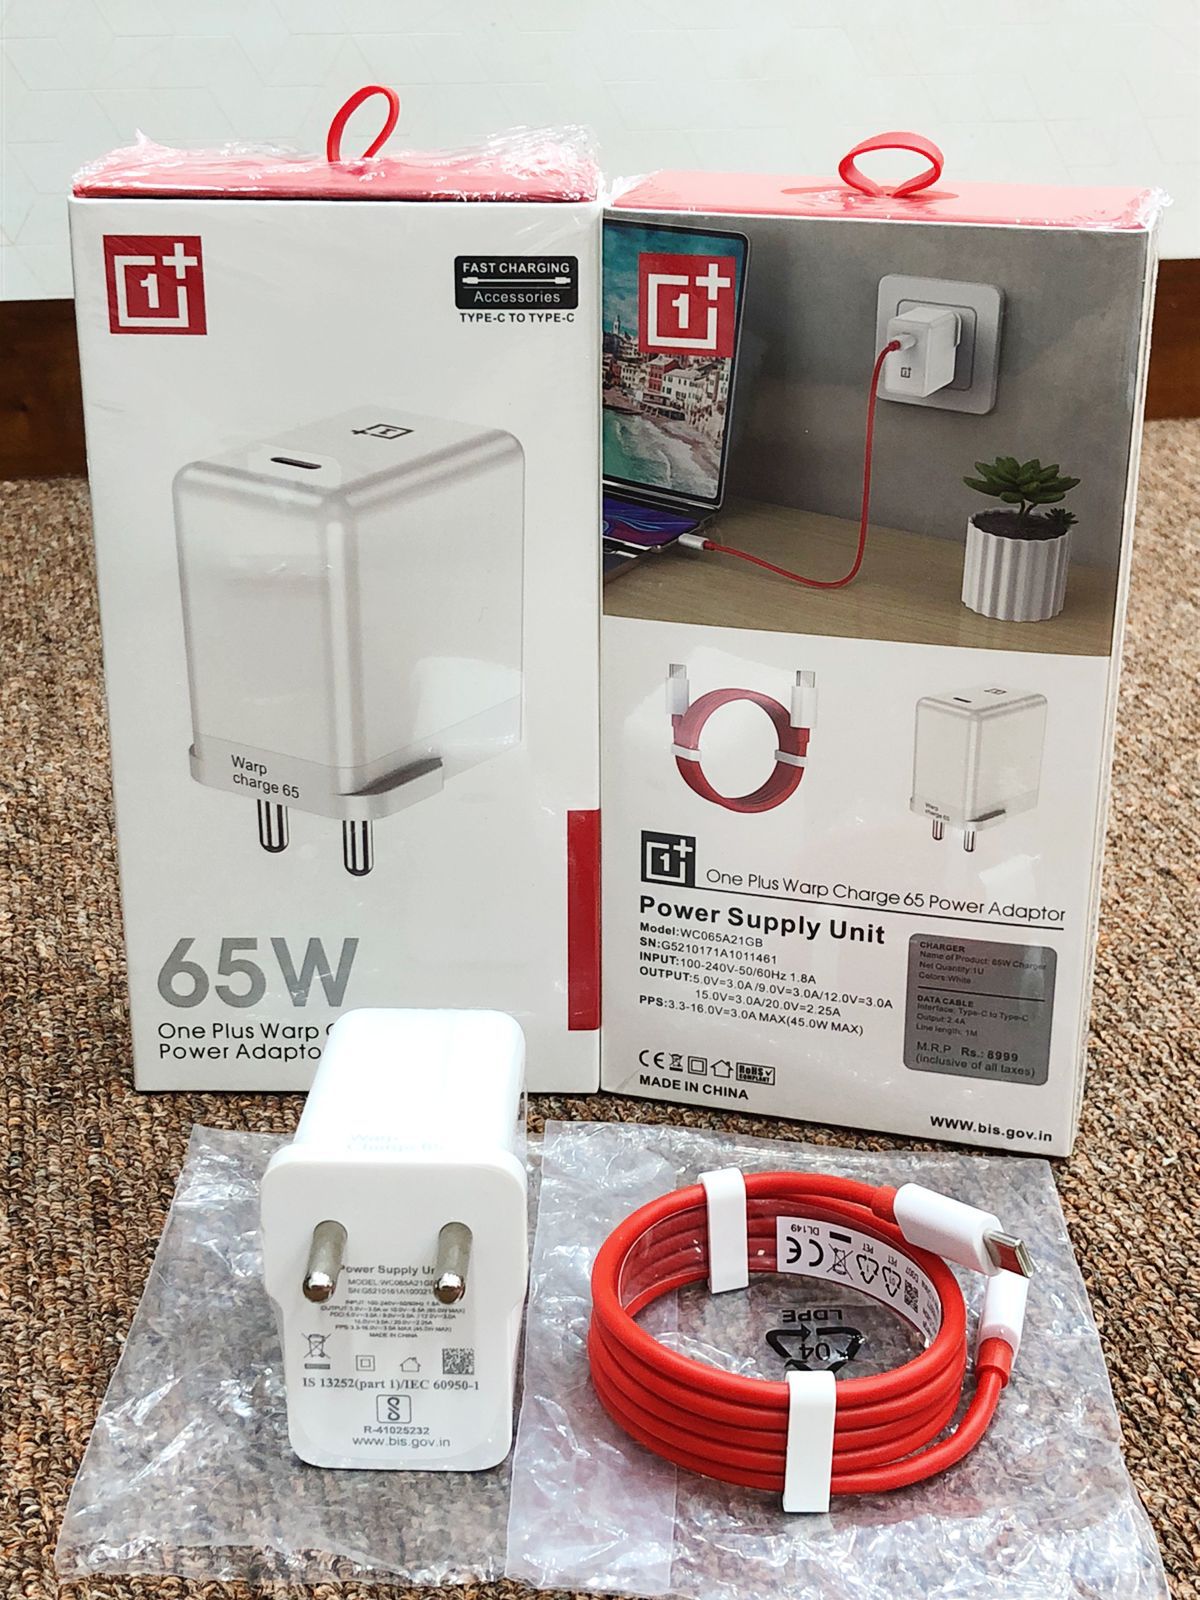 oneplus charger box